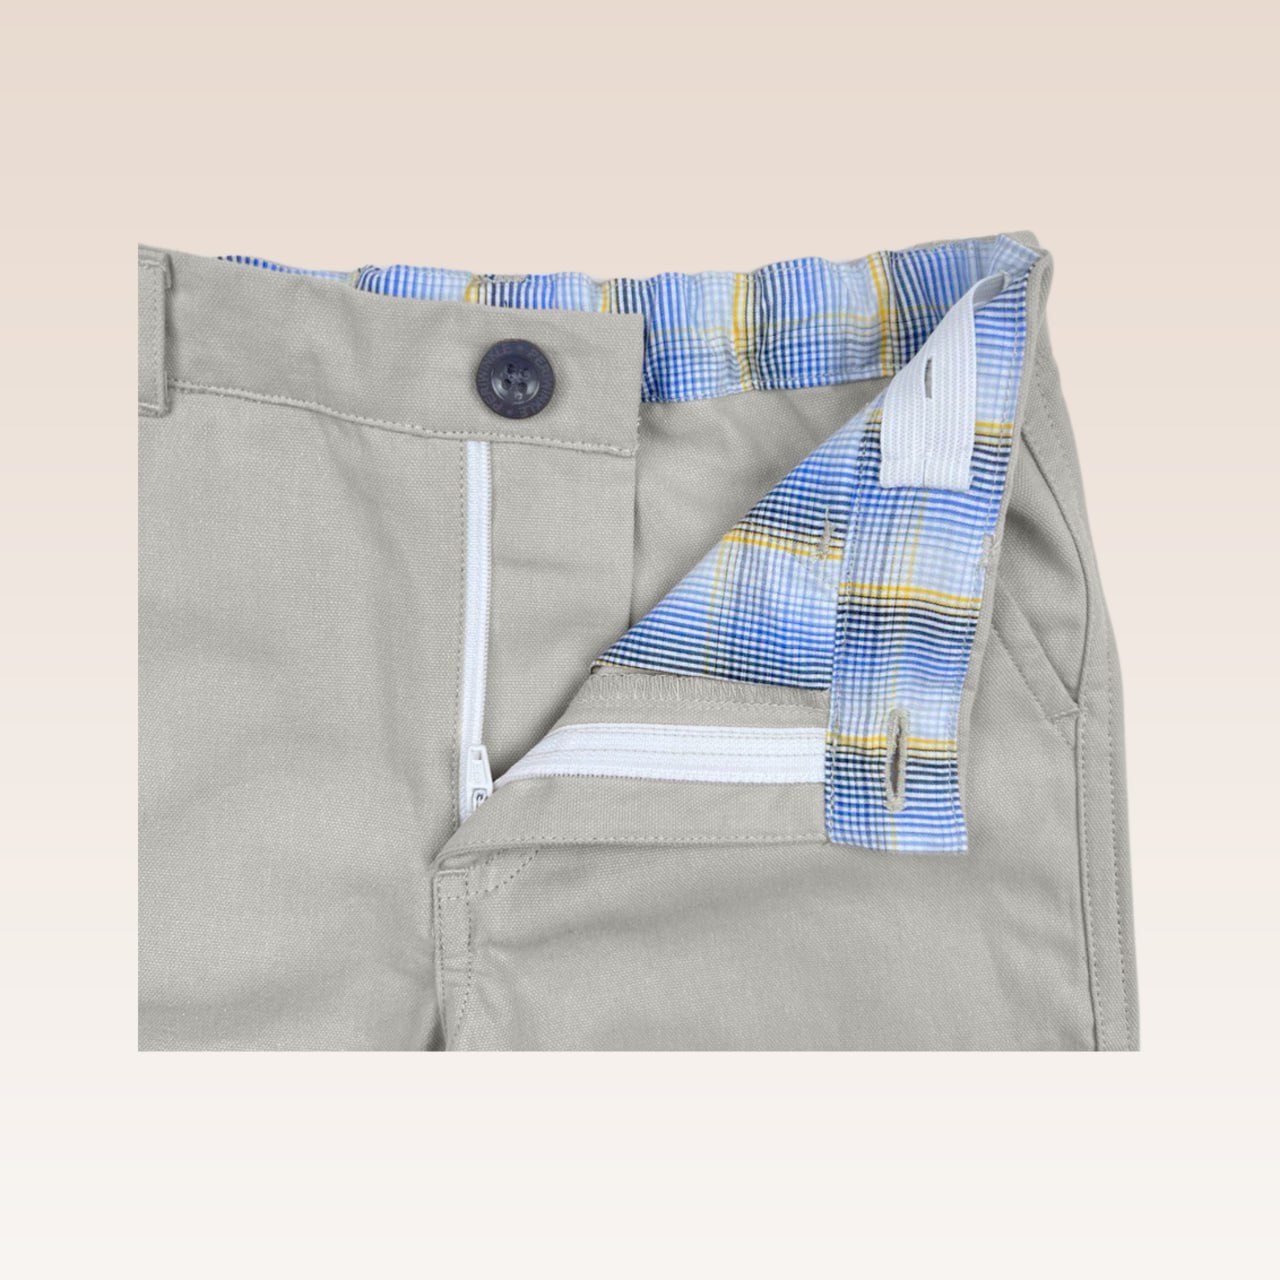 Mateo Boys Beige Slim Fit Shorts with Pockets